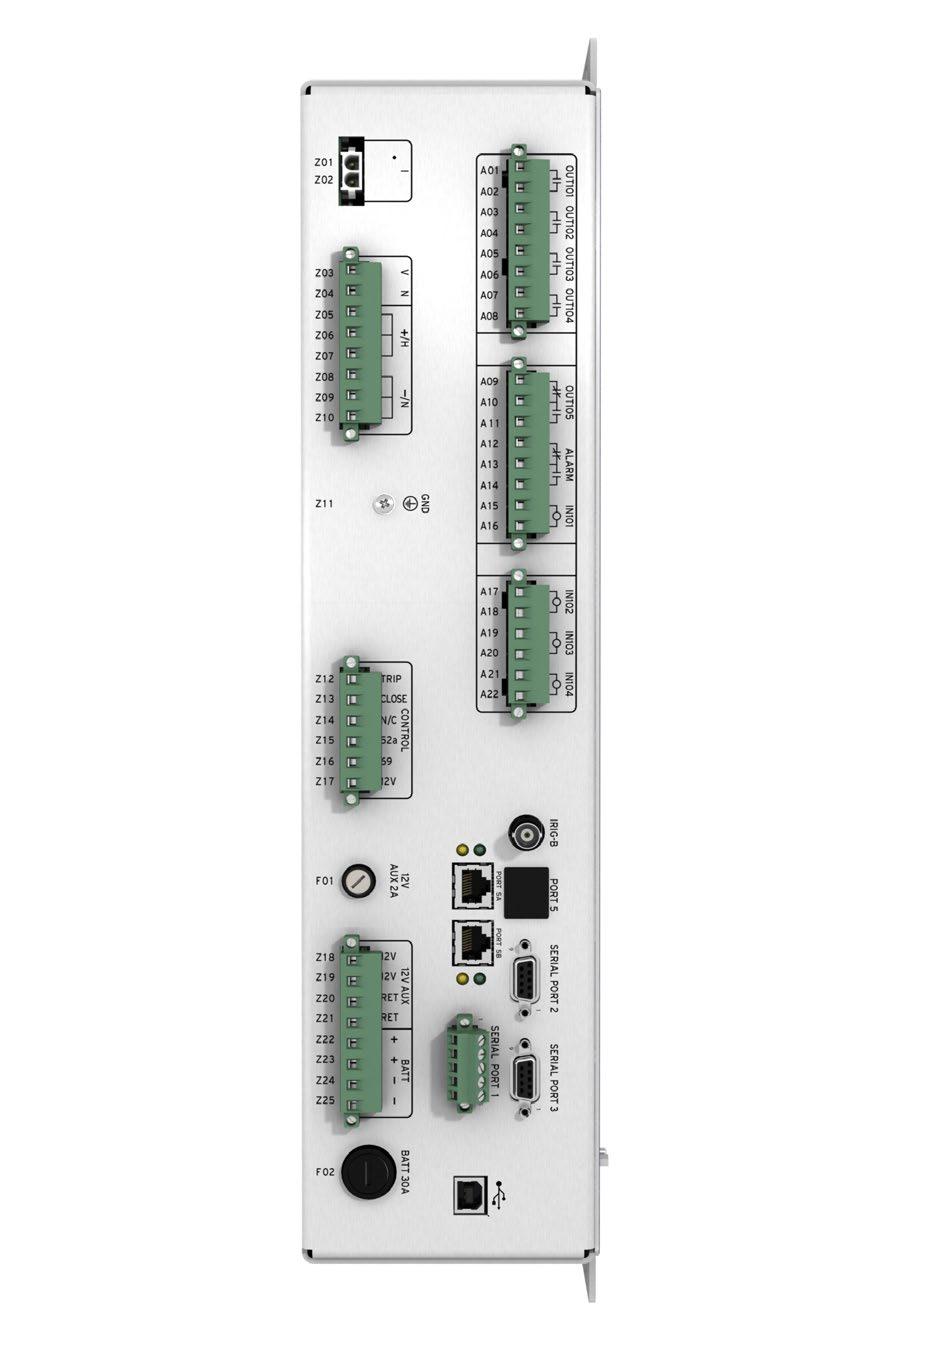 6 SELogic variables replace traditional panel switches with 6 latching, 6 local, and 6 remote control points. Built-in synchrophasor measurements provide realtime electrical quantities.